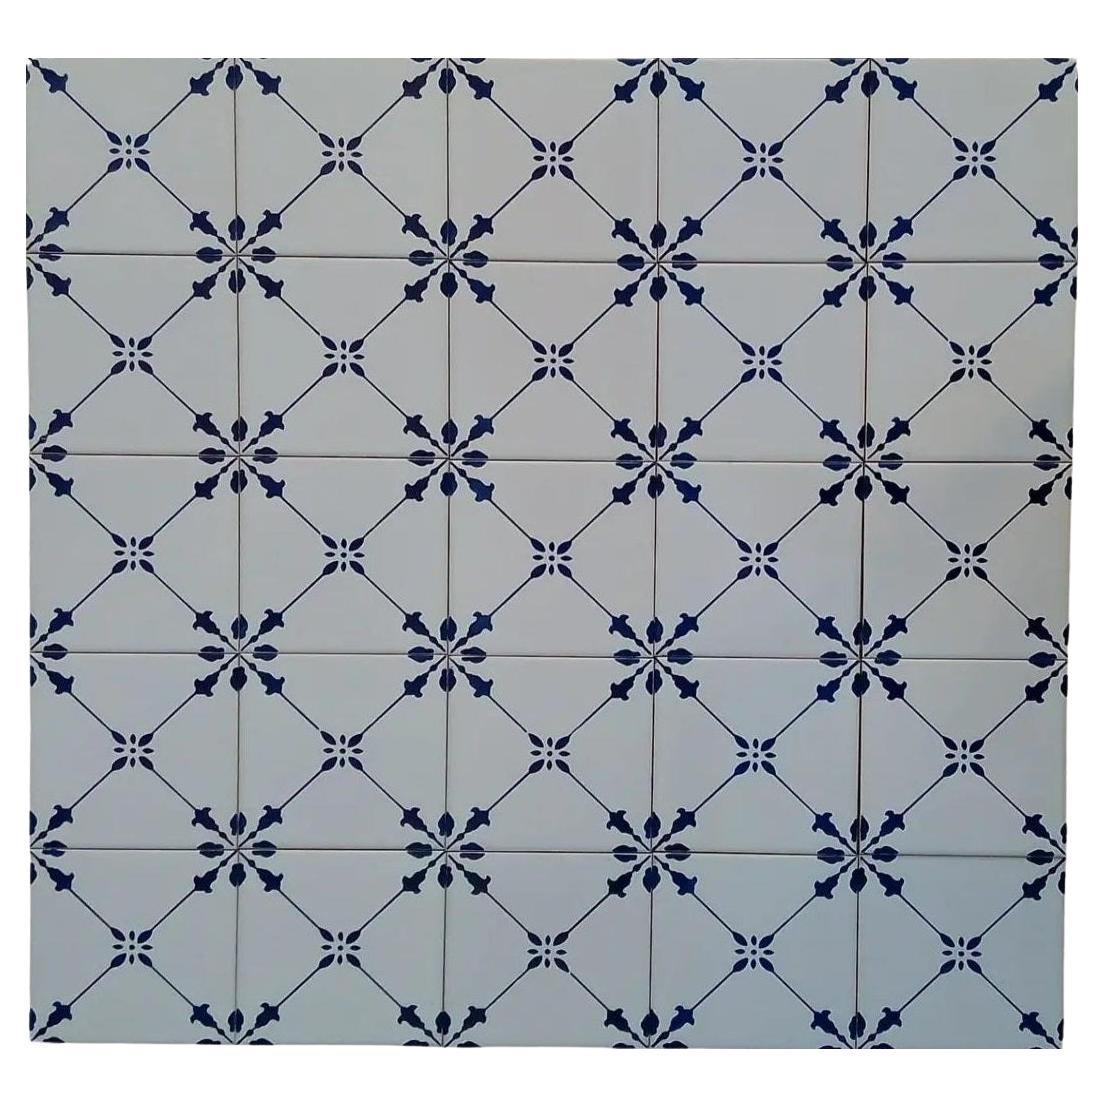 Azulejos Portuguese Hand Painted Tiles for Kitchens, Bathrooms and Outdoors